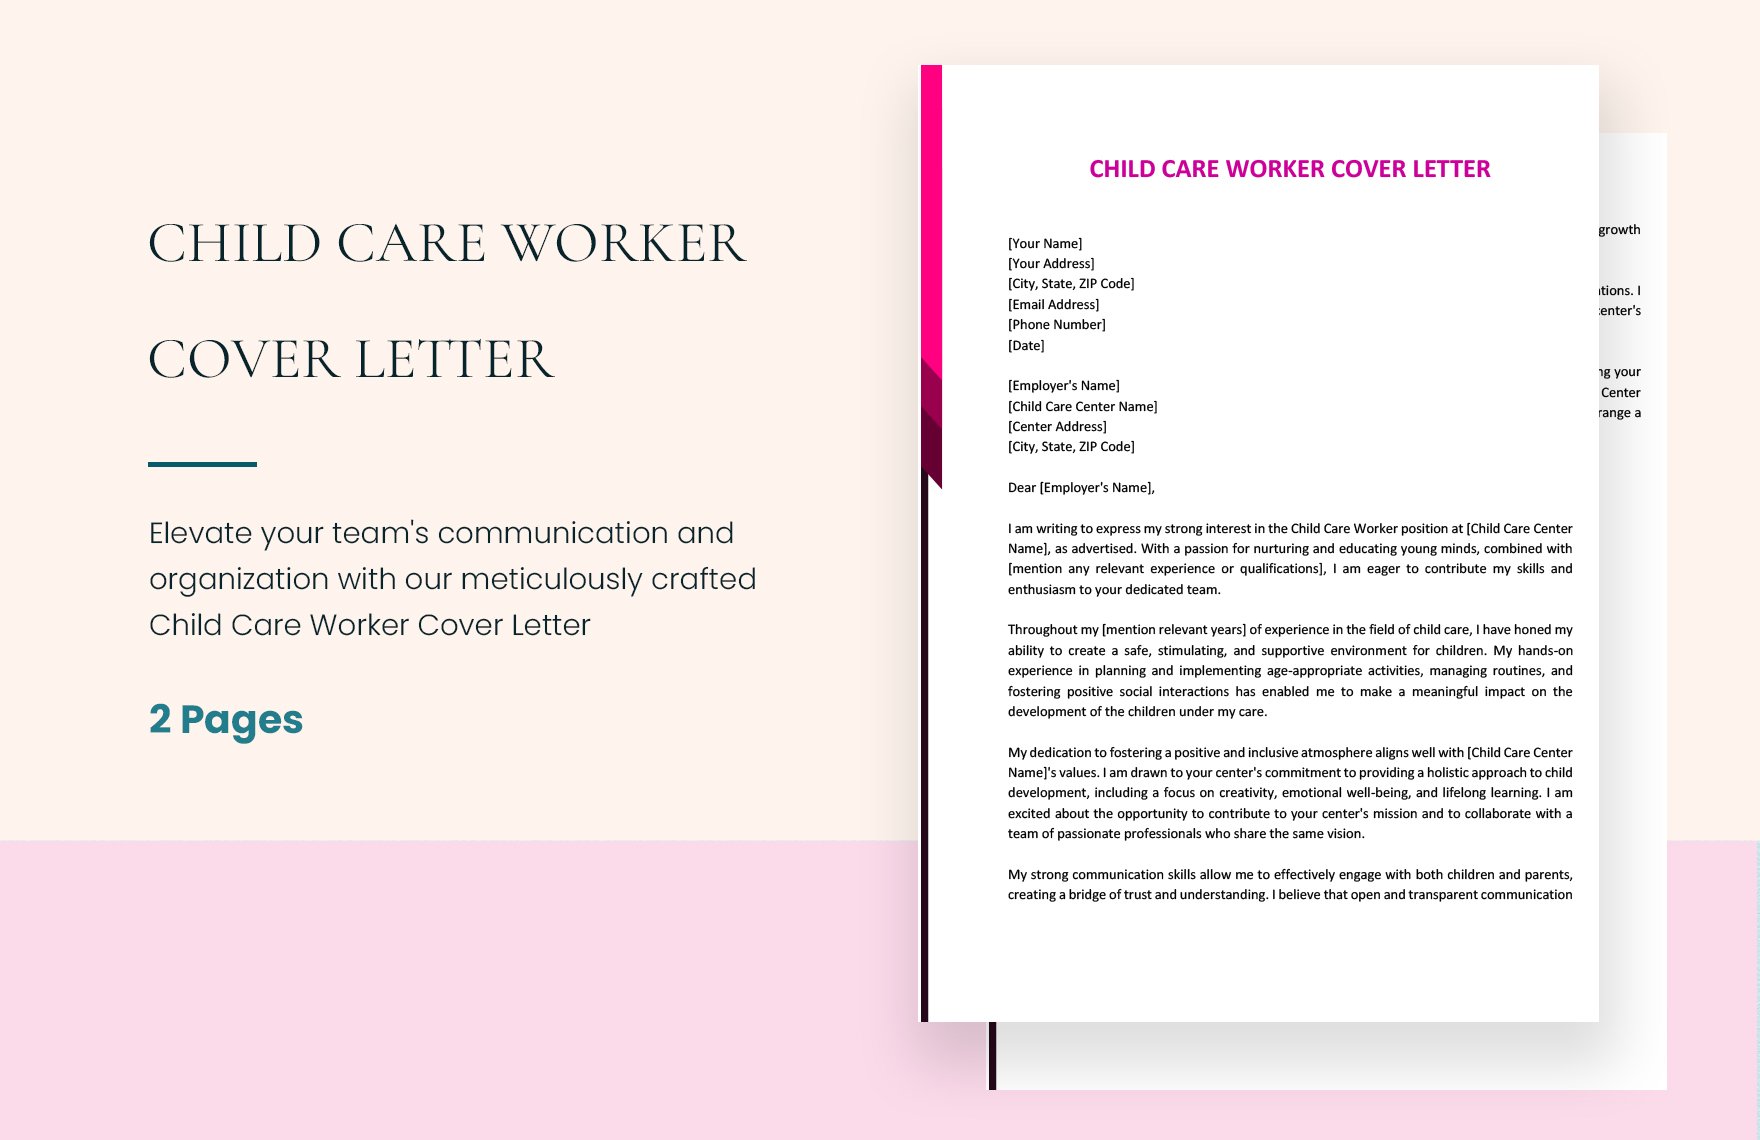 Child Care Worker Cover Letter